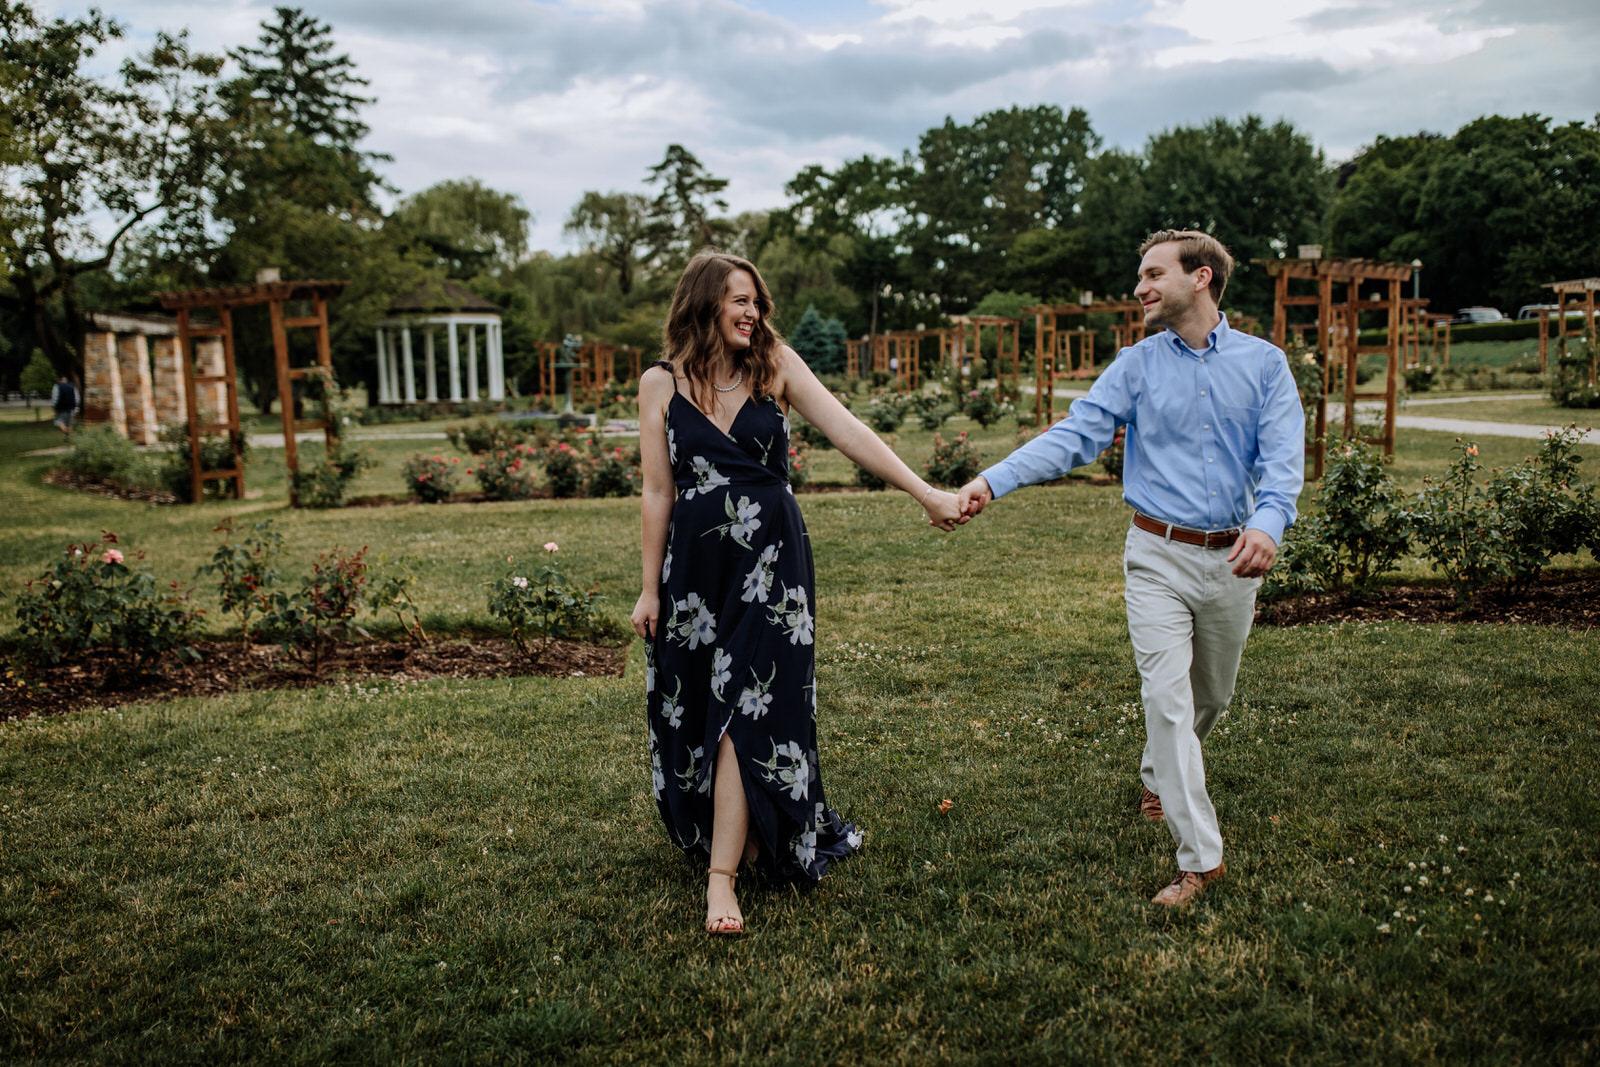 Man and woman holding hands and walking together through Allentown Rose Gardens